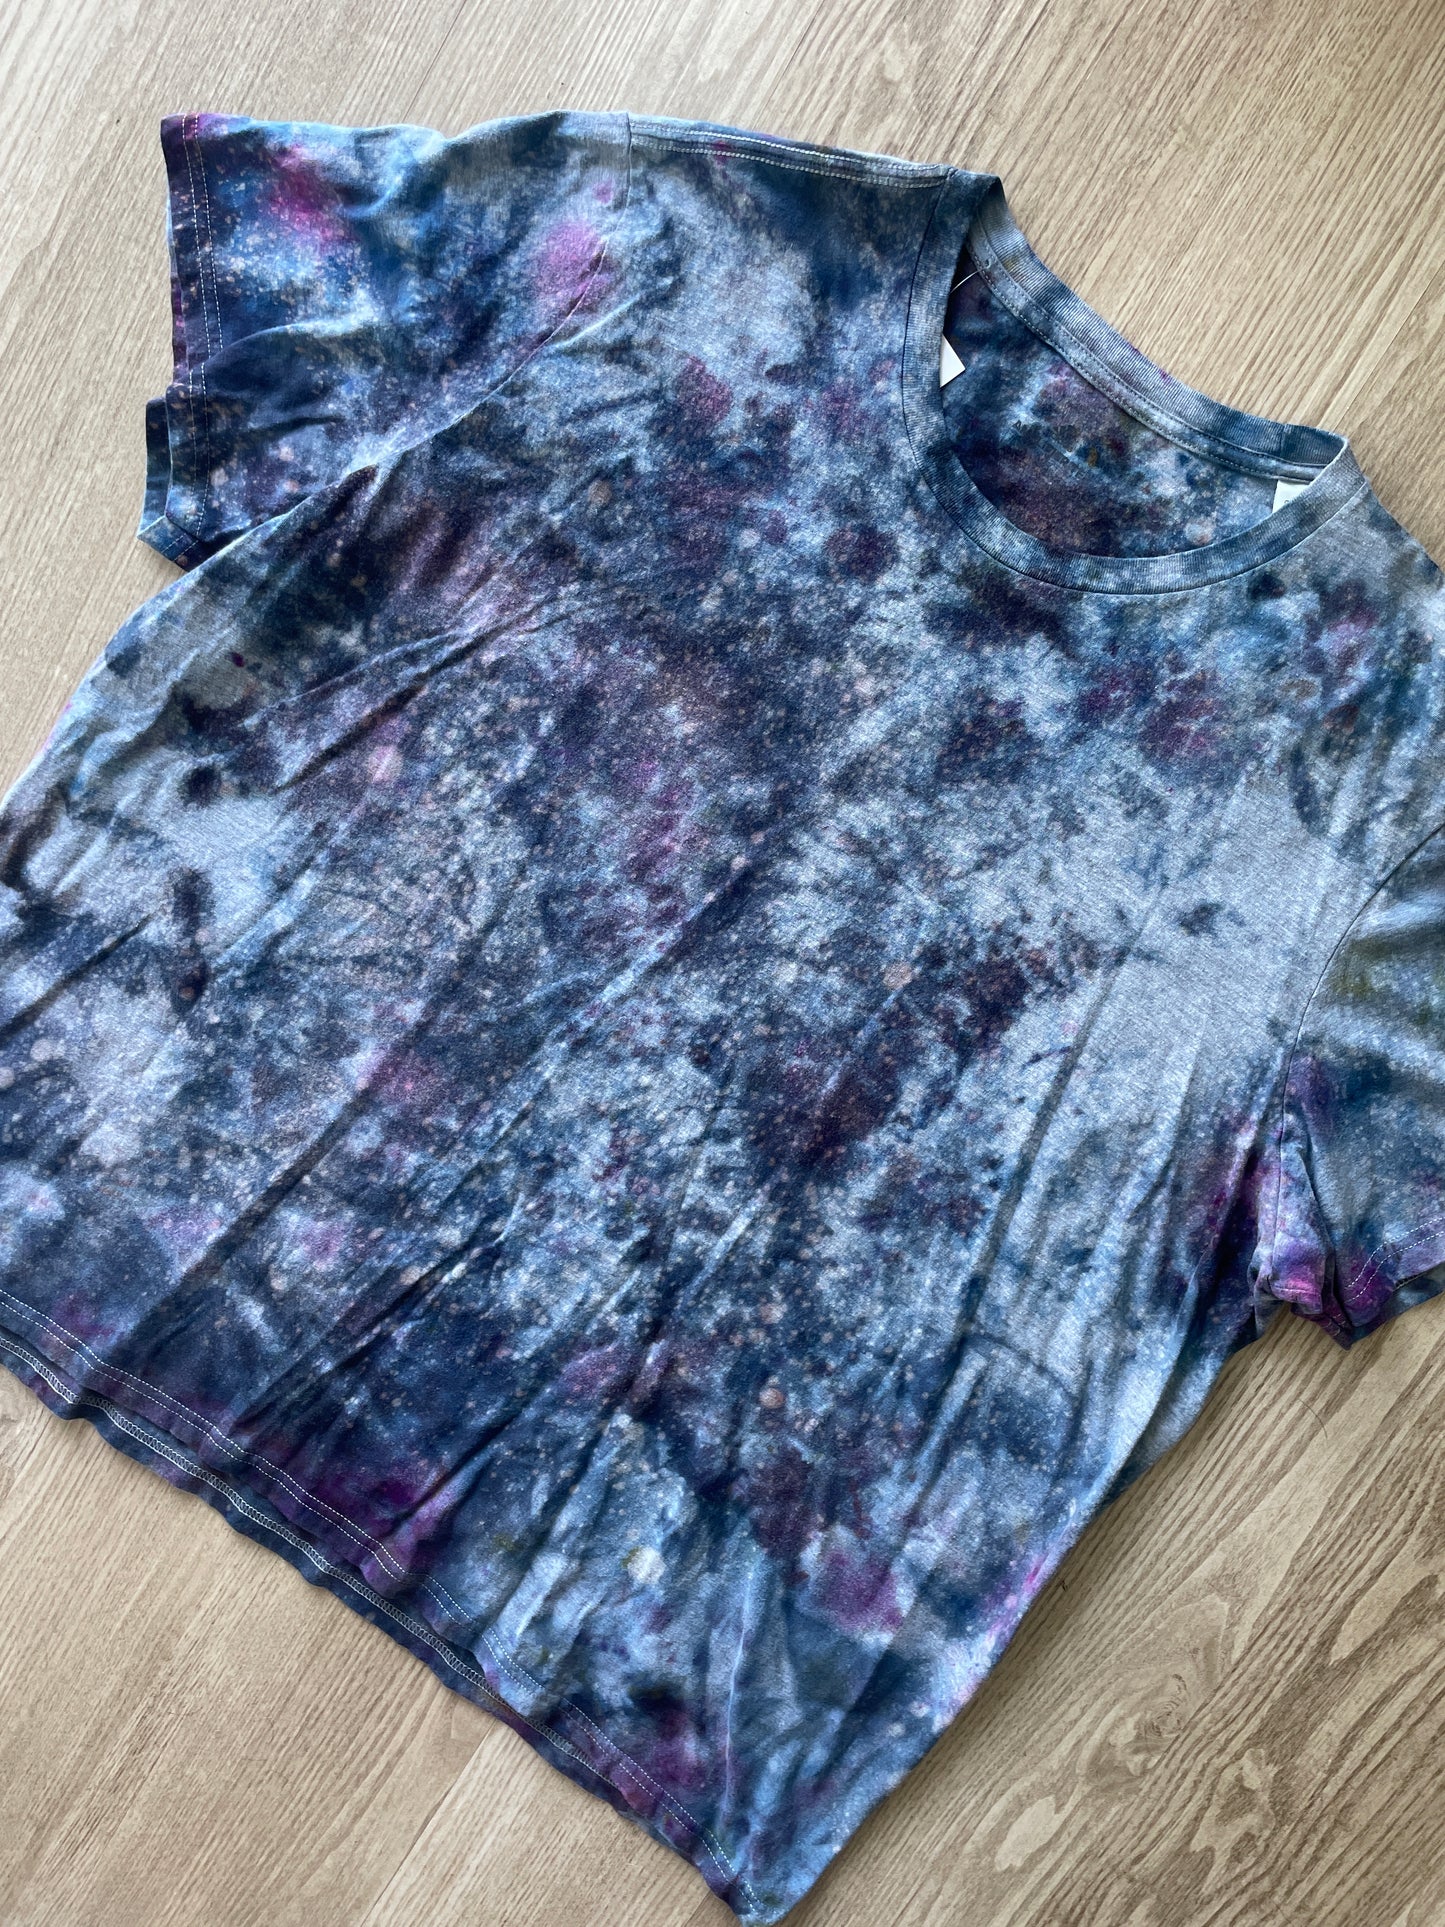 3XL Men’s adidas Tie Dye T-Shirt | One-Of-a-Kind Gray and Black Ice Dye Short Sleeve